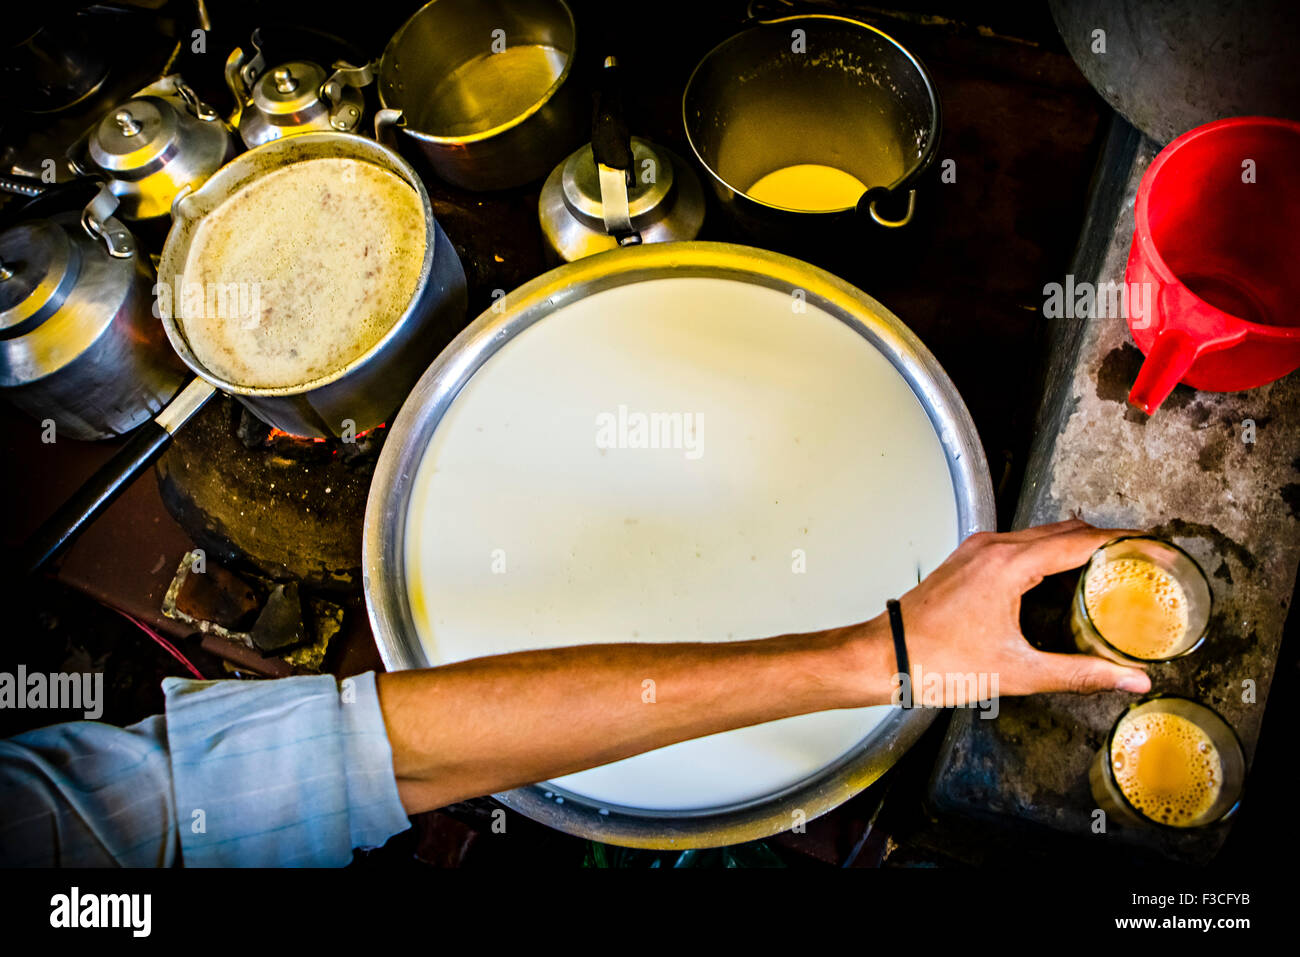 Person cooking on stove, cropped Stock Photo